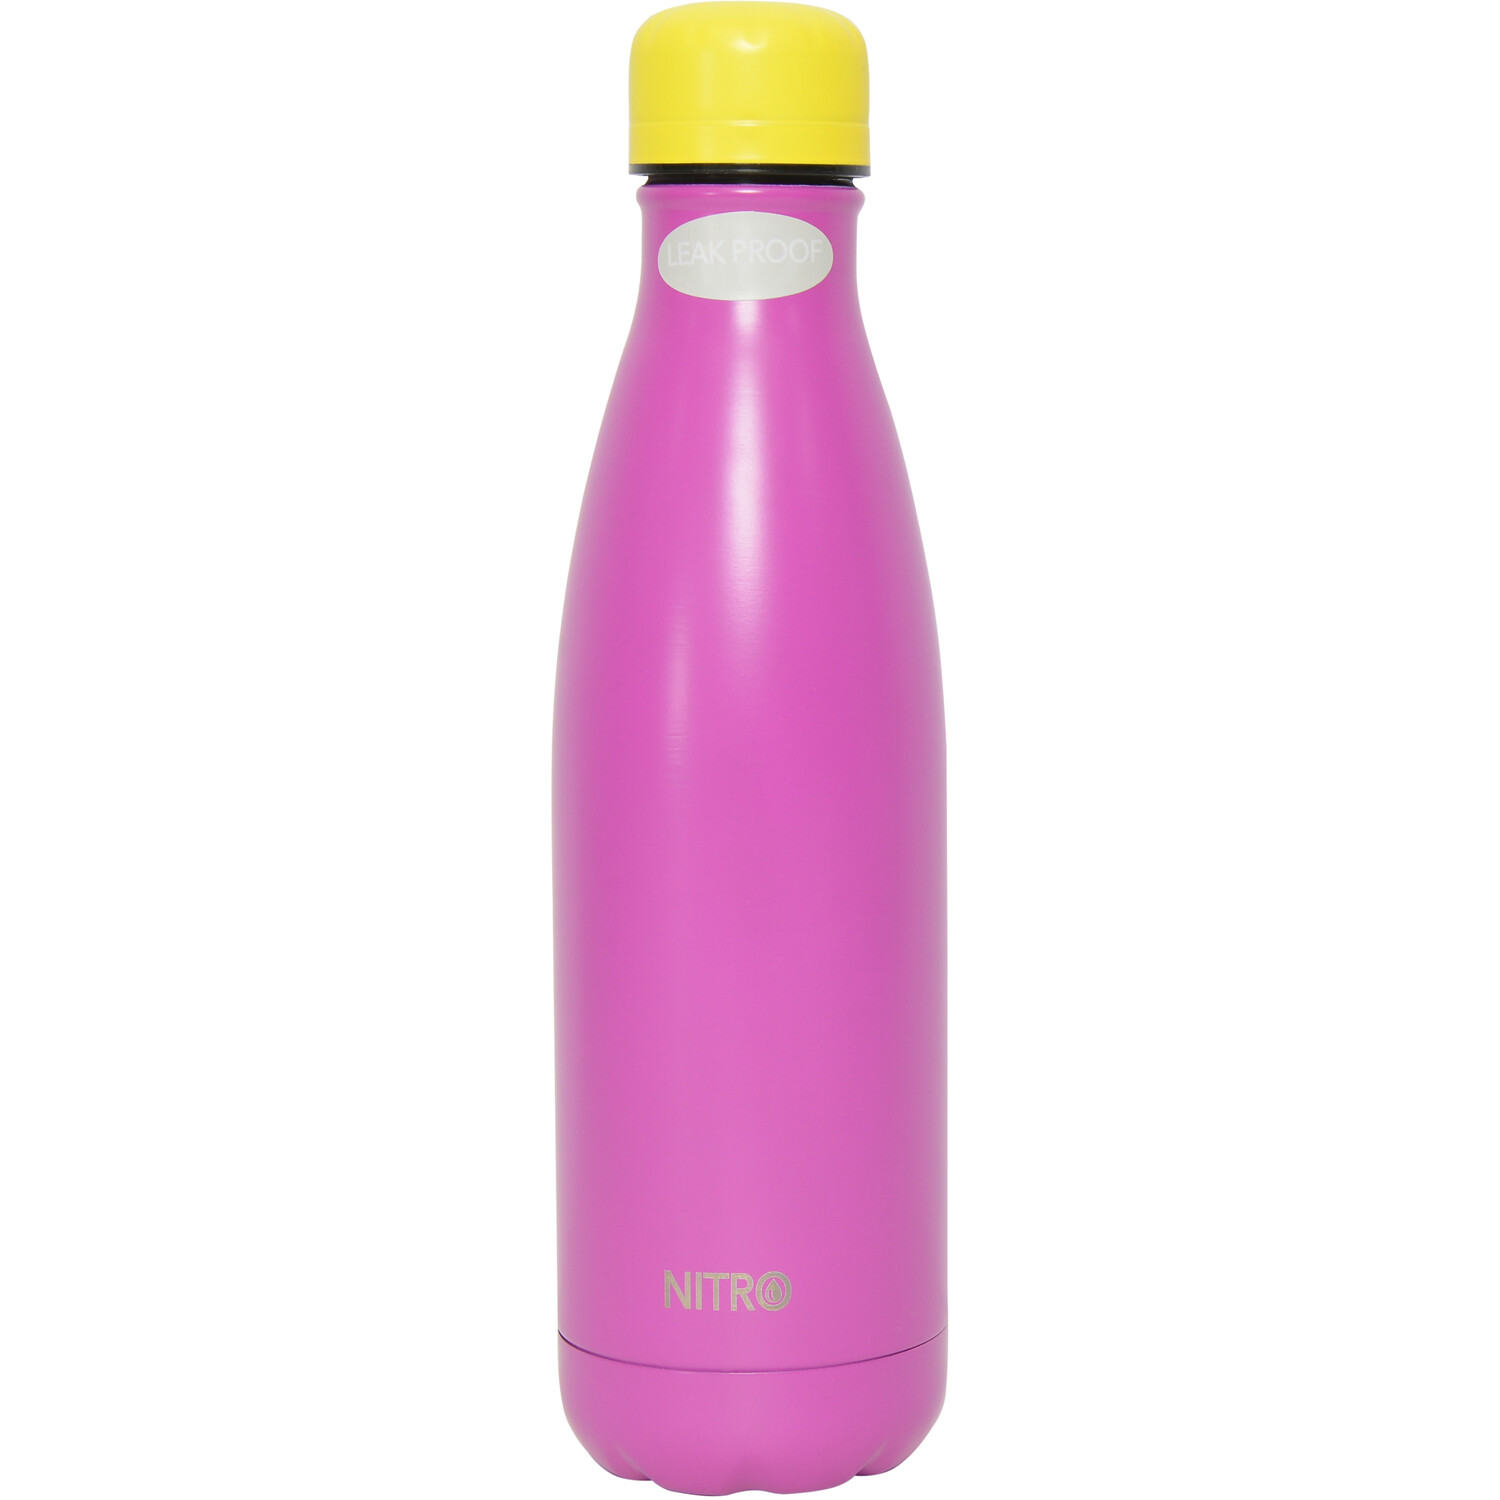 Nitro Neon Pink/Coral Stainless Steel Bottle Image 1